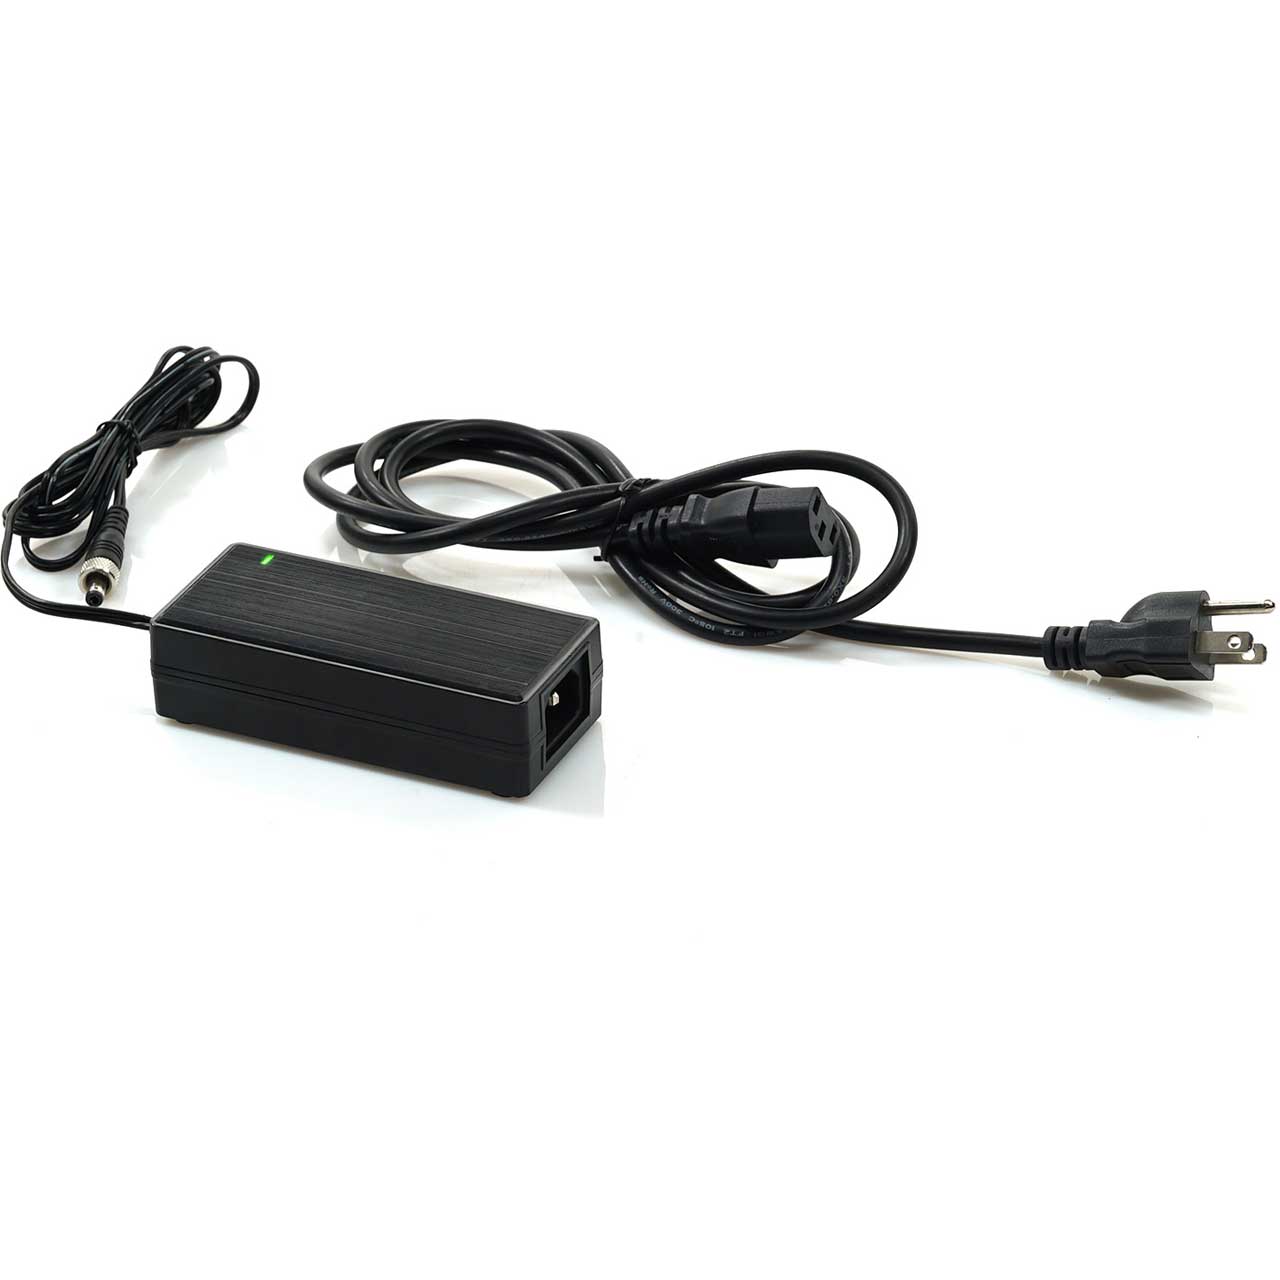 TREKSTOR SURFBOOK W1 W2 AC Adapter Charger 12v